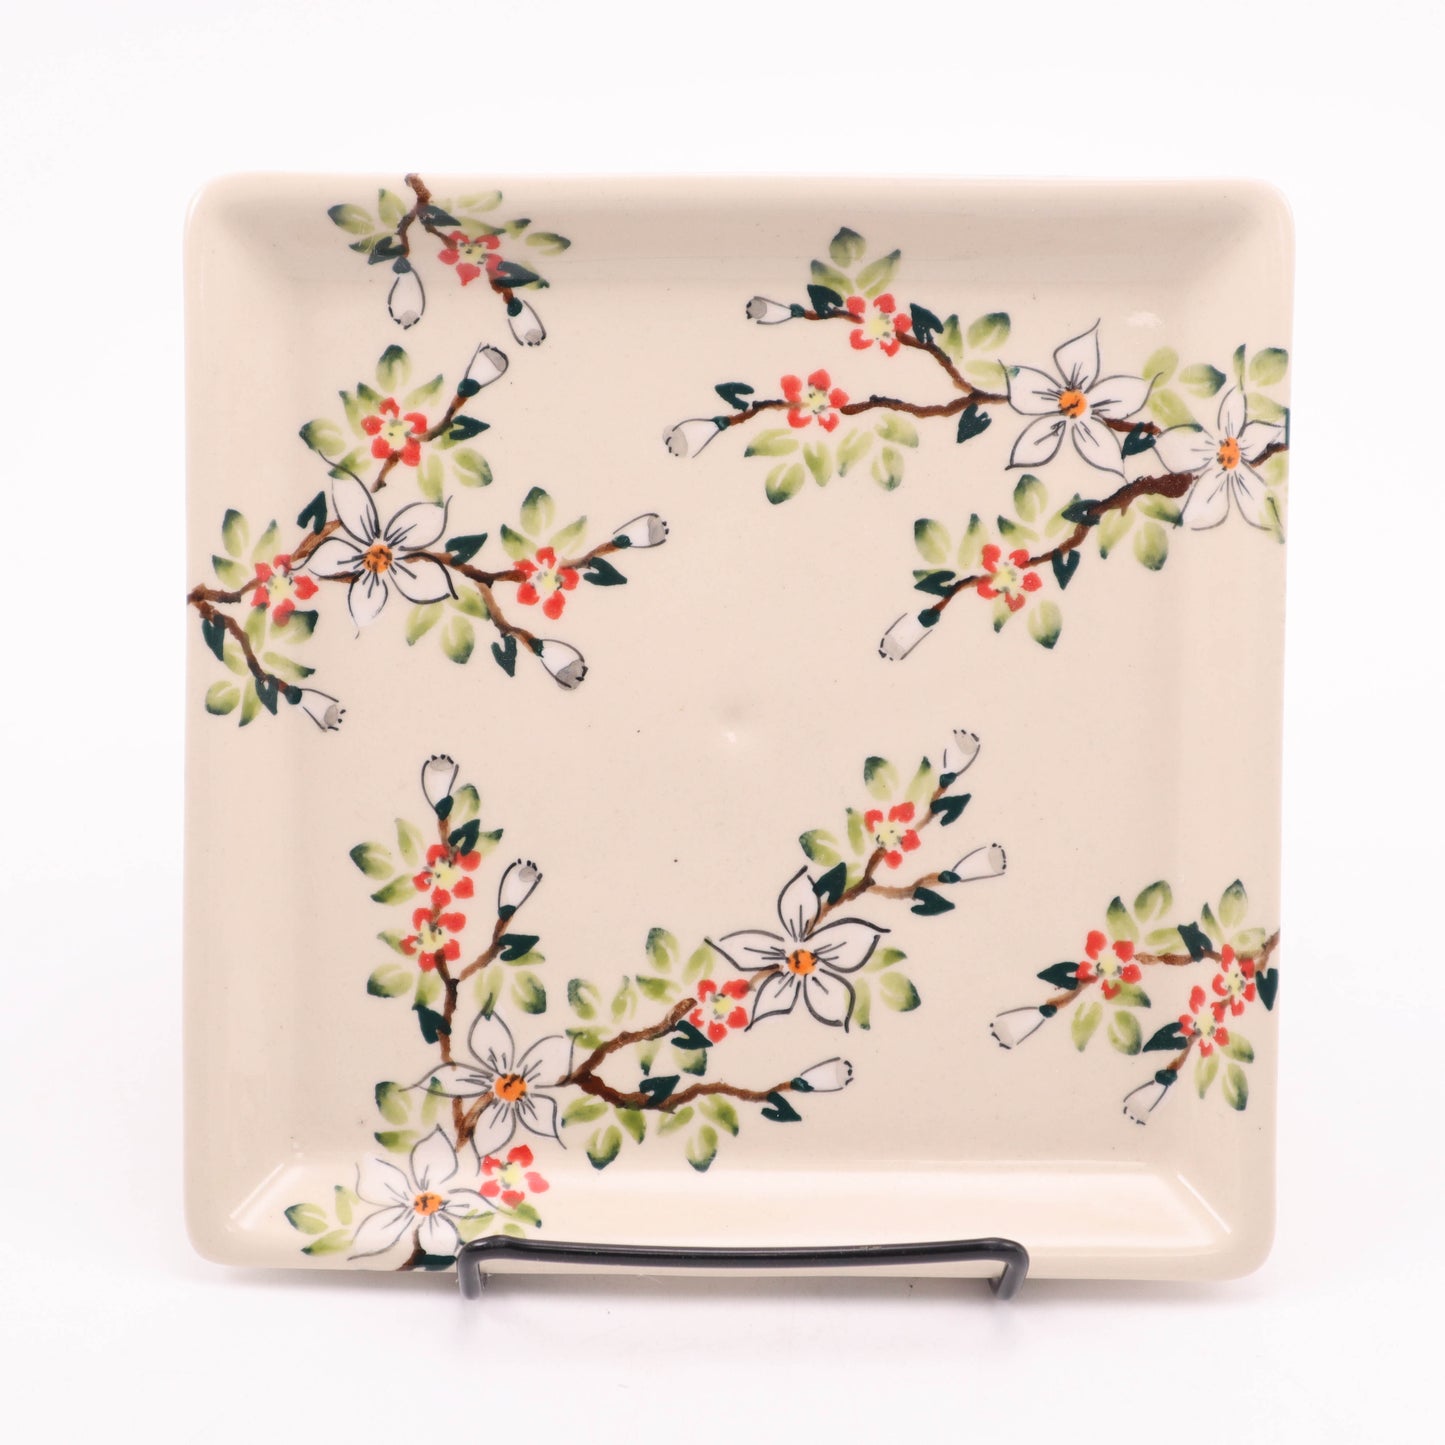 7" Square Plate. Pattern: Apple Blossom Red